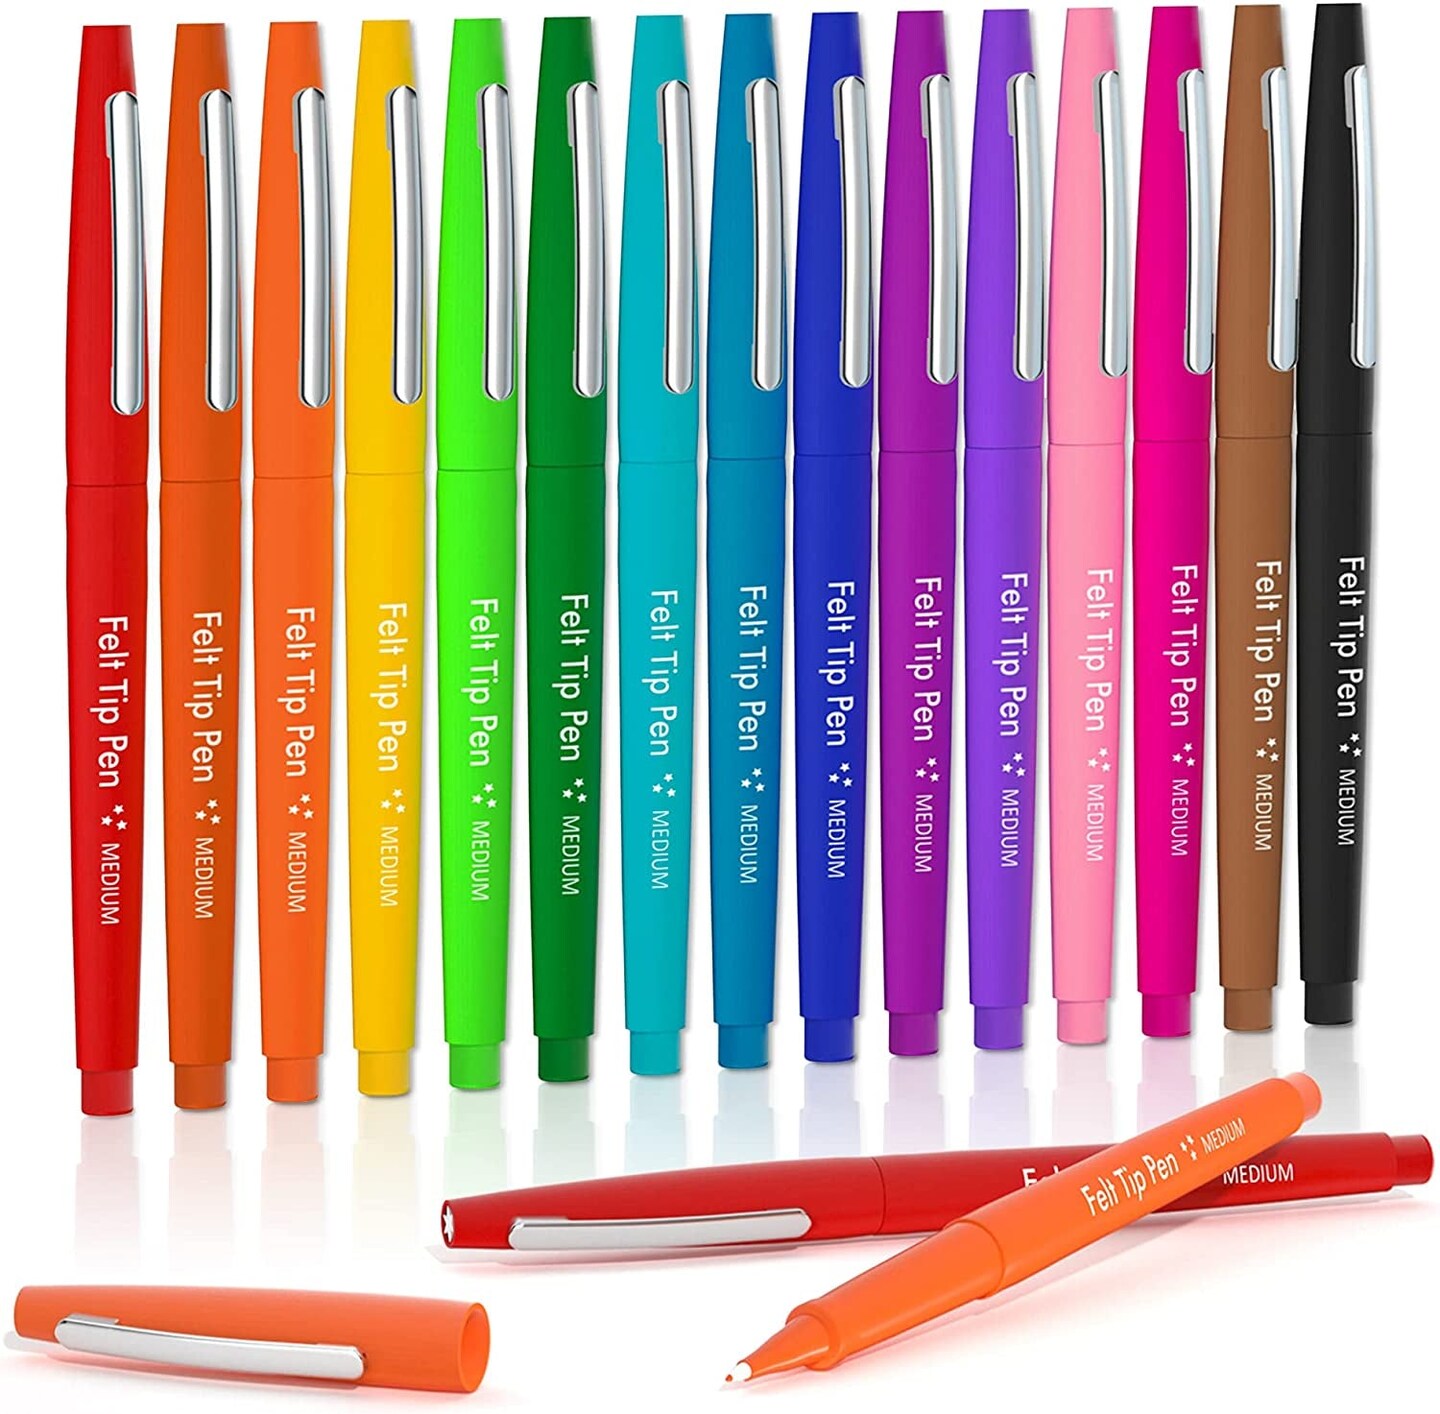 Lelix 60 Colors Felt Tip Pens, Medium Point Felt Pens, Assorted Colors Markers Pens for Journaling, Writing, Note Taking, Planner Coloring, Perfect